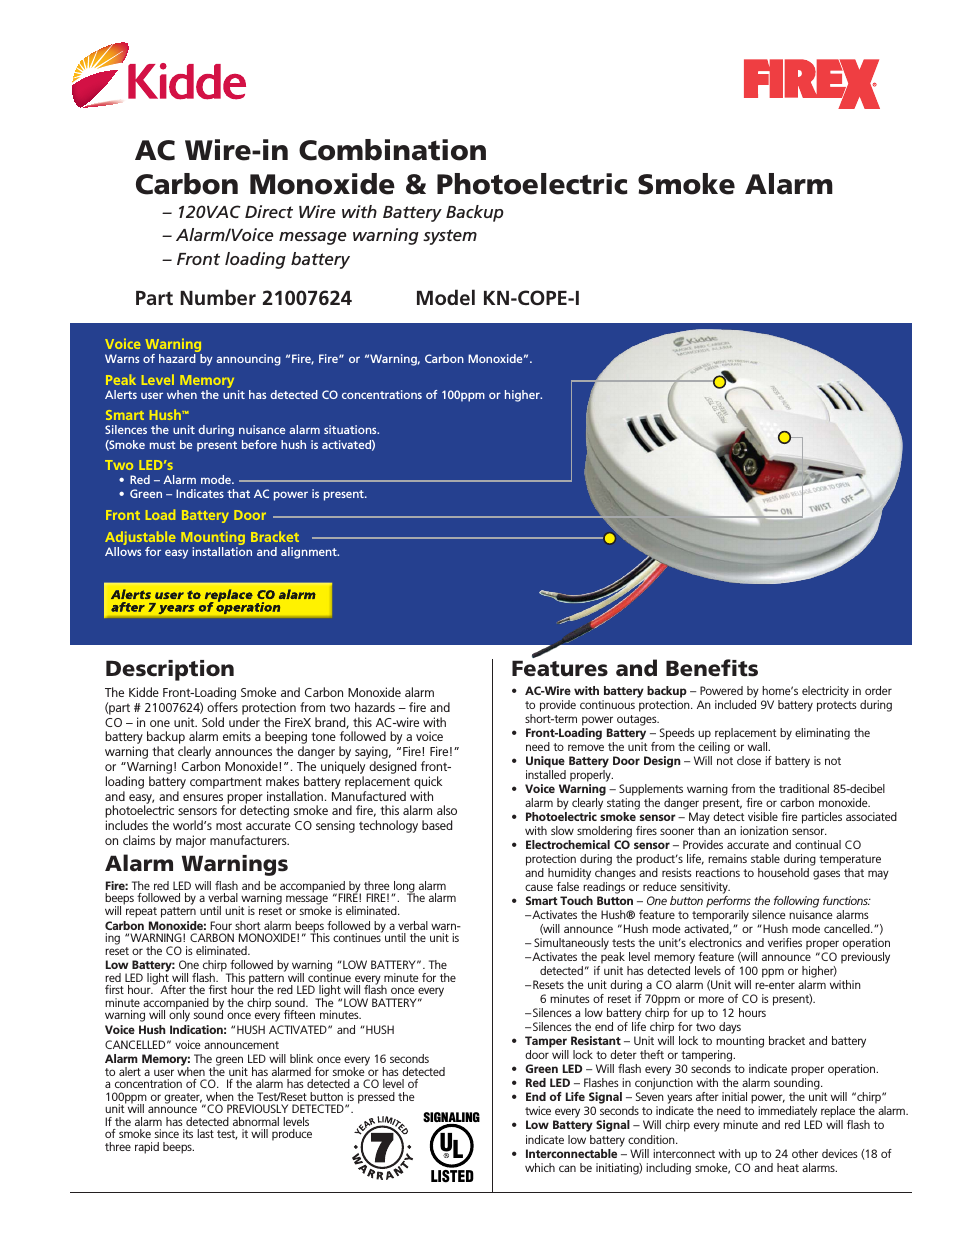 AC Wire-in Combination Carbon Monoxide & Photoelectric Smoke Alarm KN-COPE-1